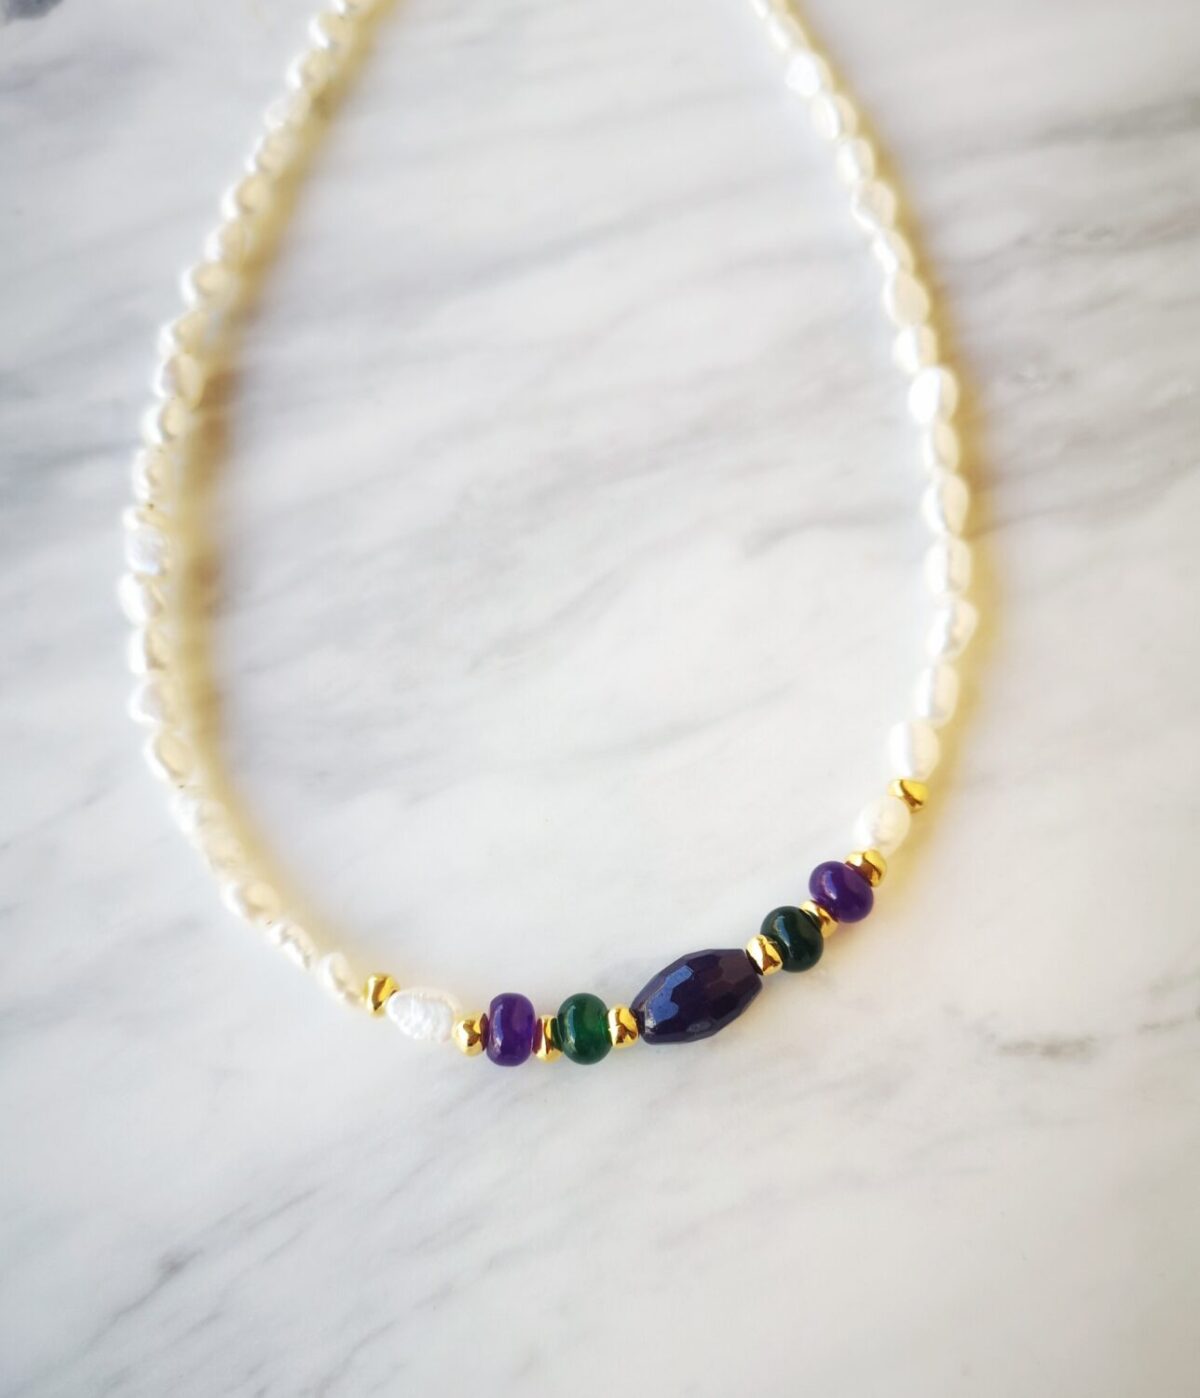 Pearl agate necklace